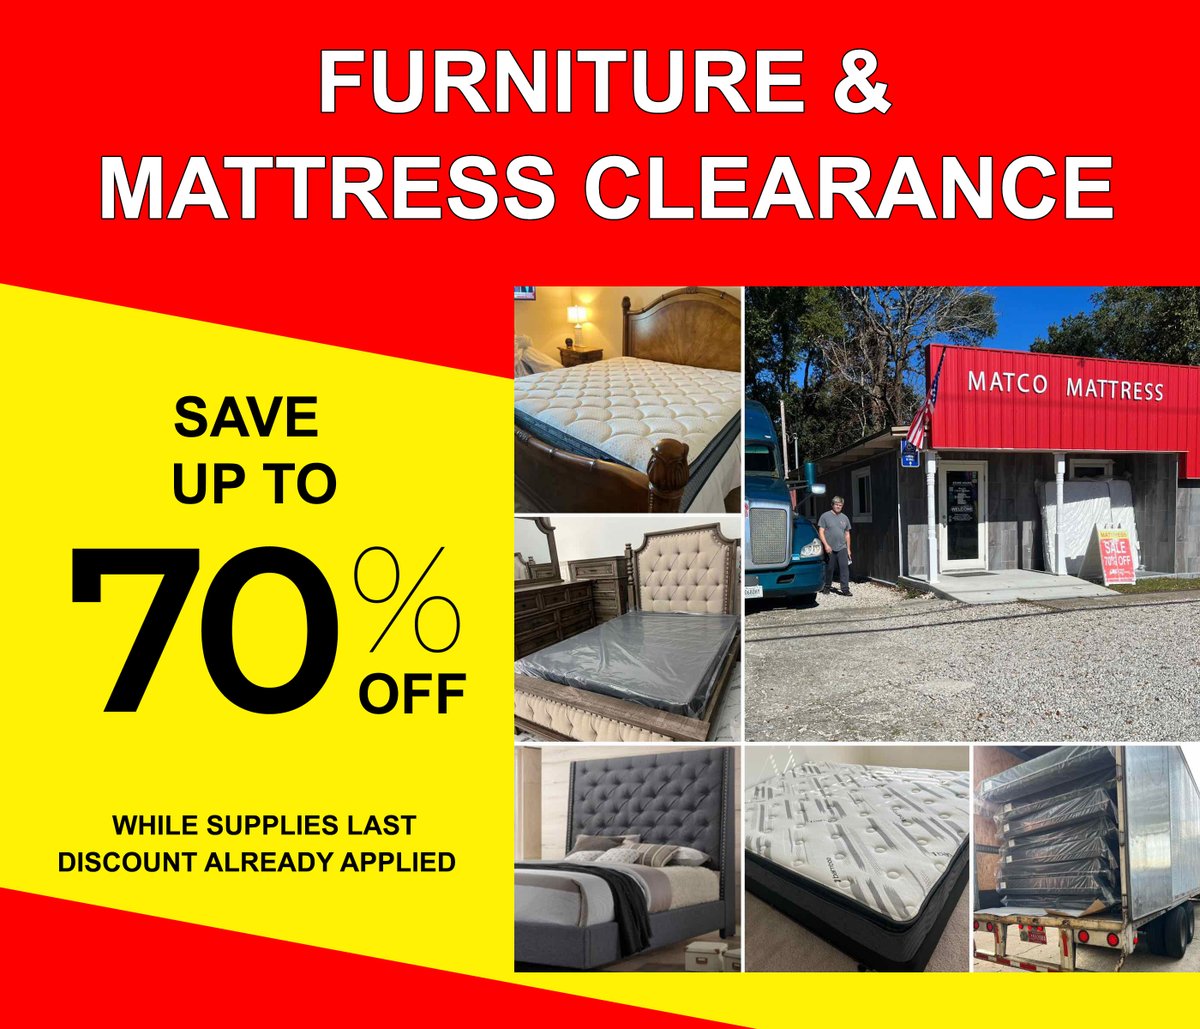 Revamp Your Home with Furniture & Mattress Clearance Deals If you're in Pensacola, Florida and searching for furniture and mattress clearance deals, head over to Matco Mattress. matcomattress.com/post/furniture…